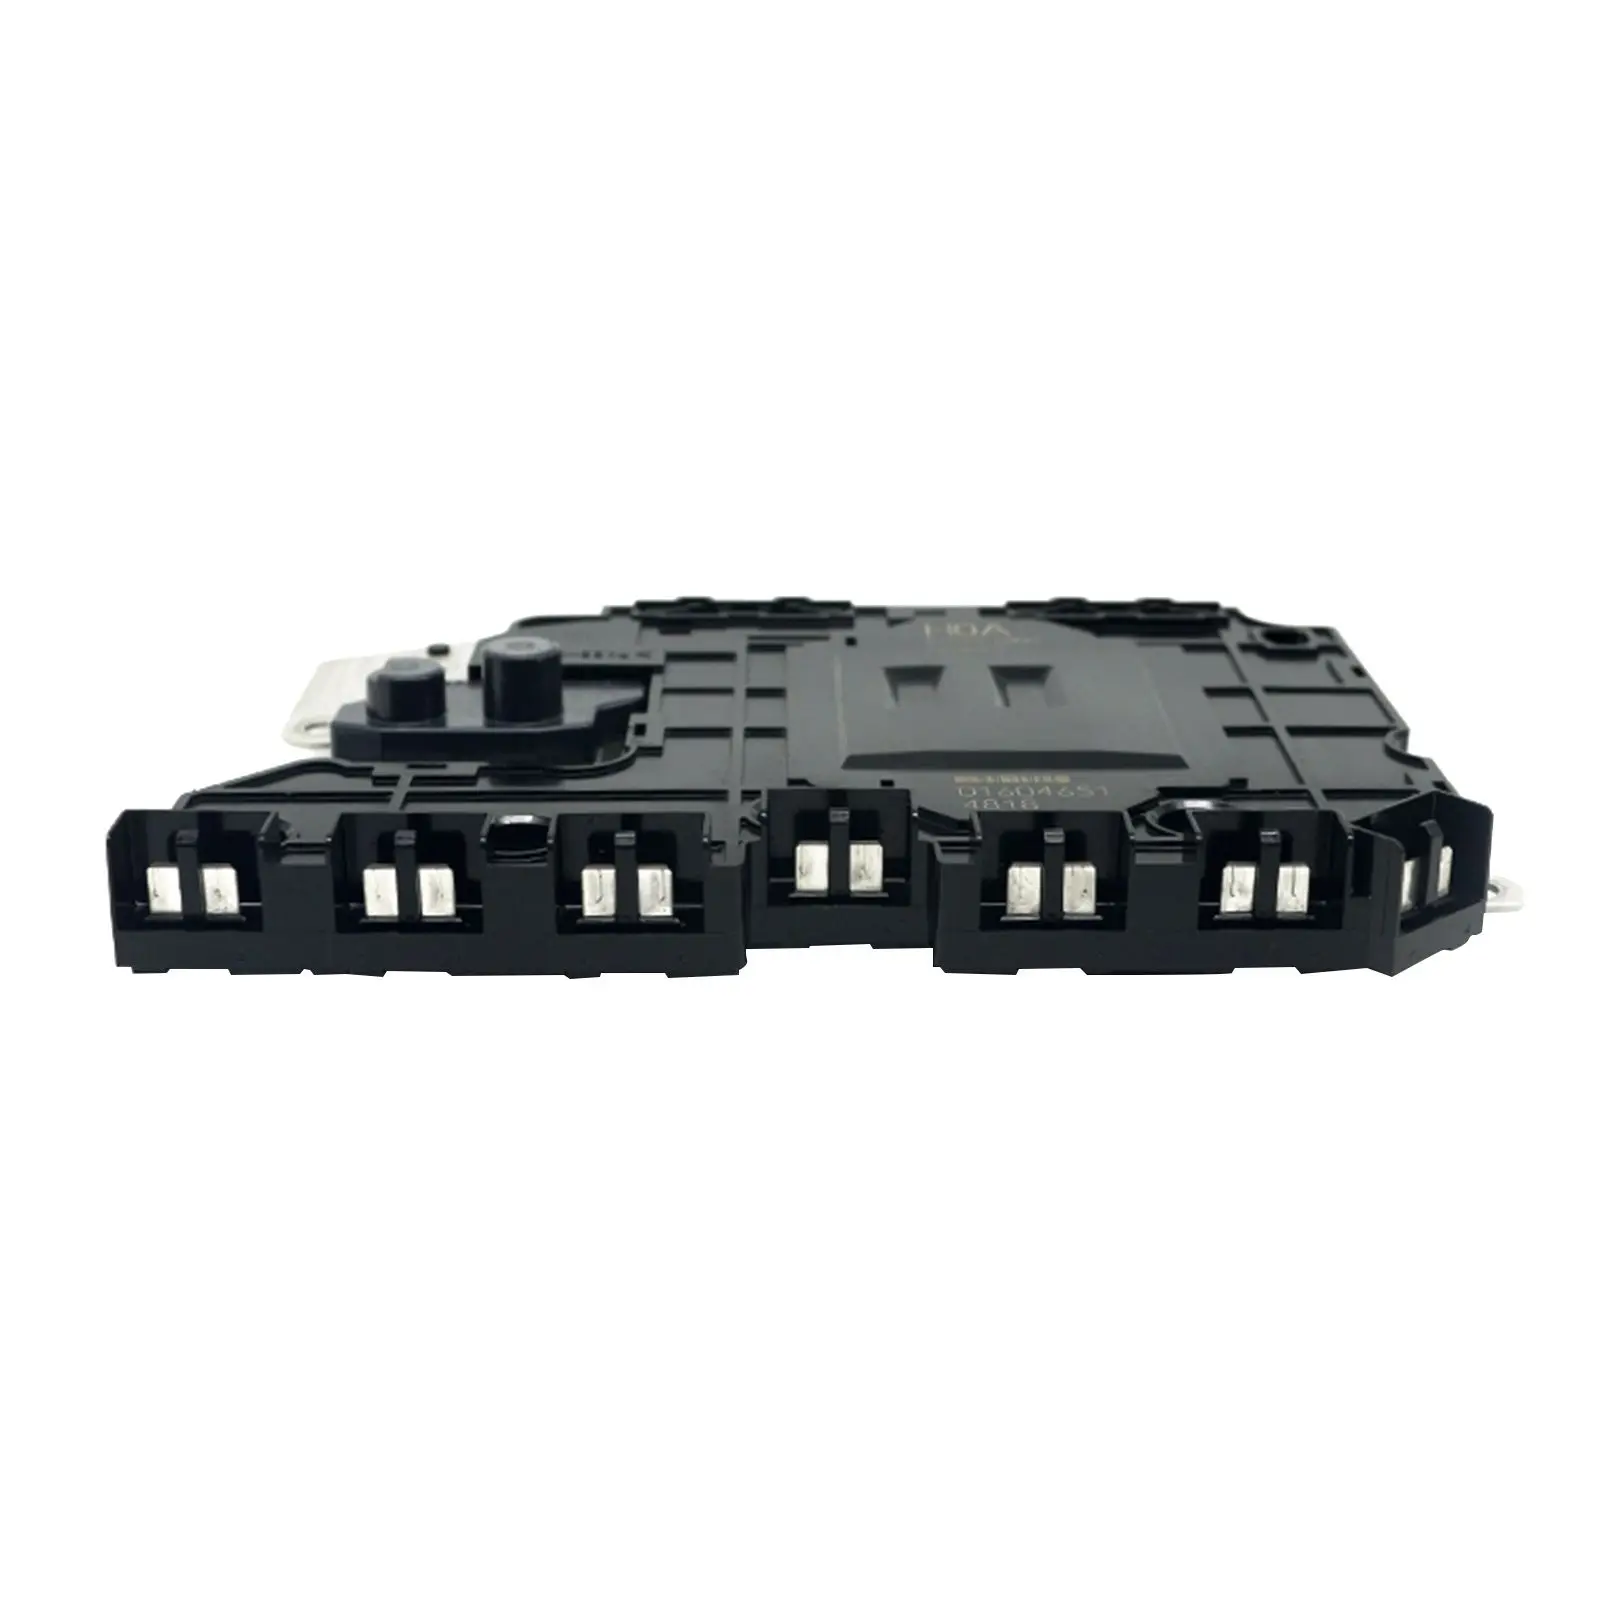 Transmission Control Module Spare Parts Replaces etc91-800N for Nissan